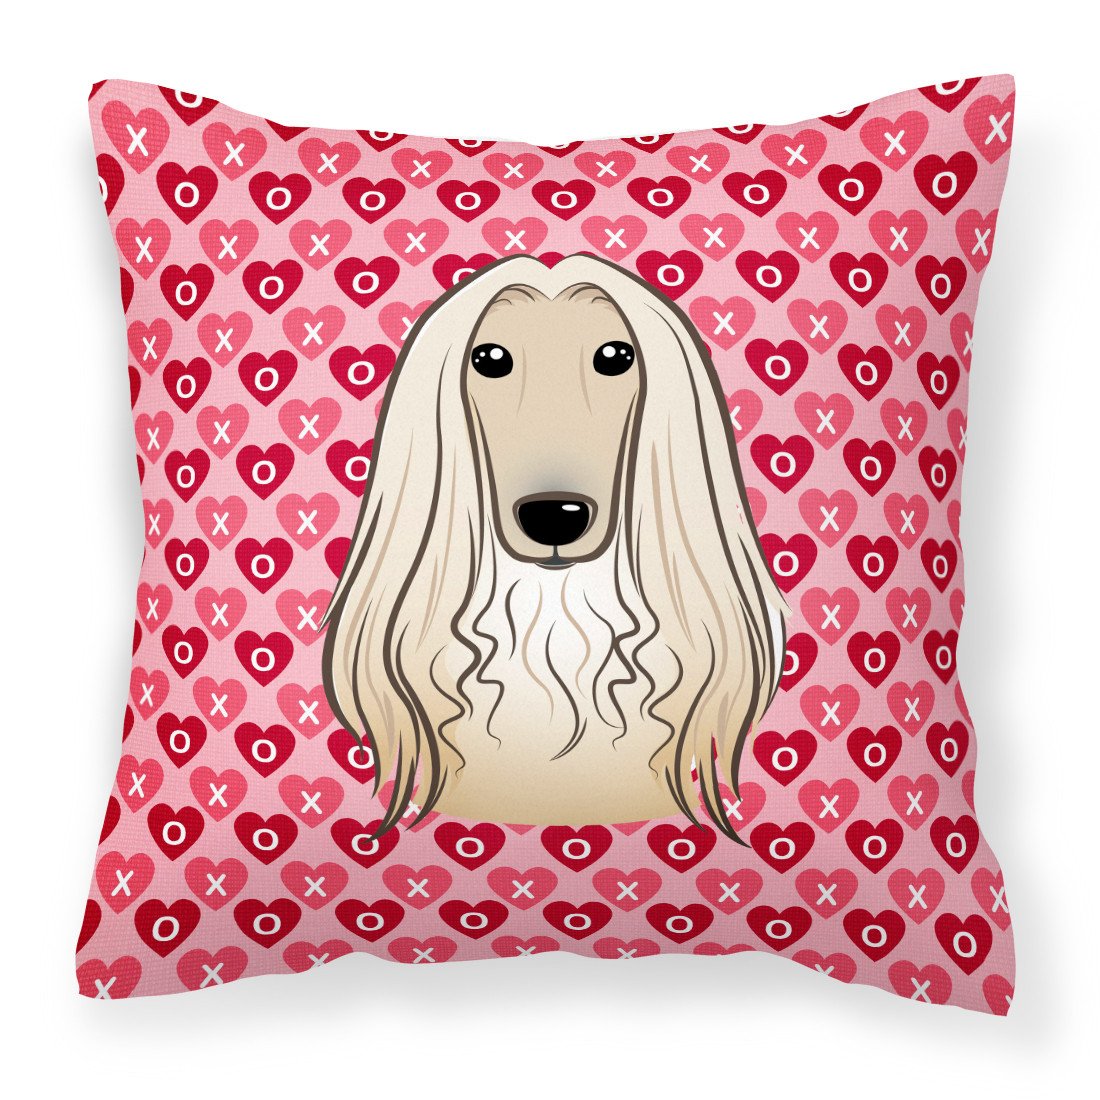 Afghan Hound Hearts Fabric Decorative Pillow BB5314PW1818 by Caroline's Treasures